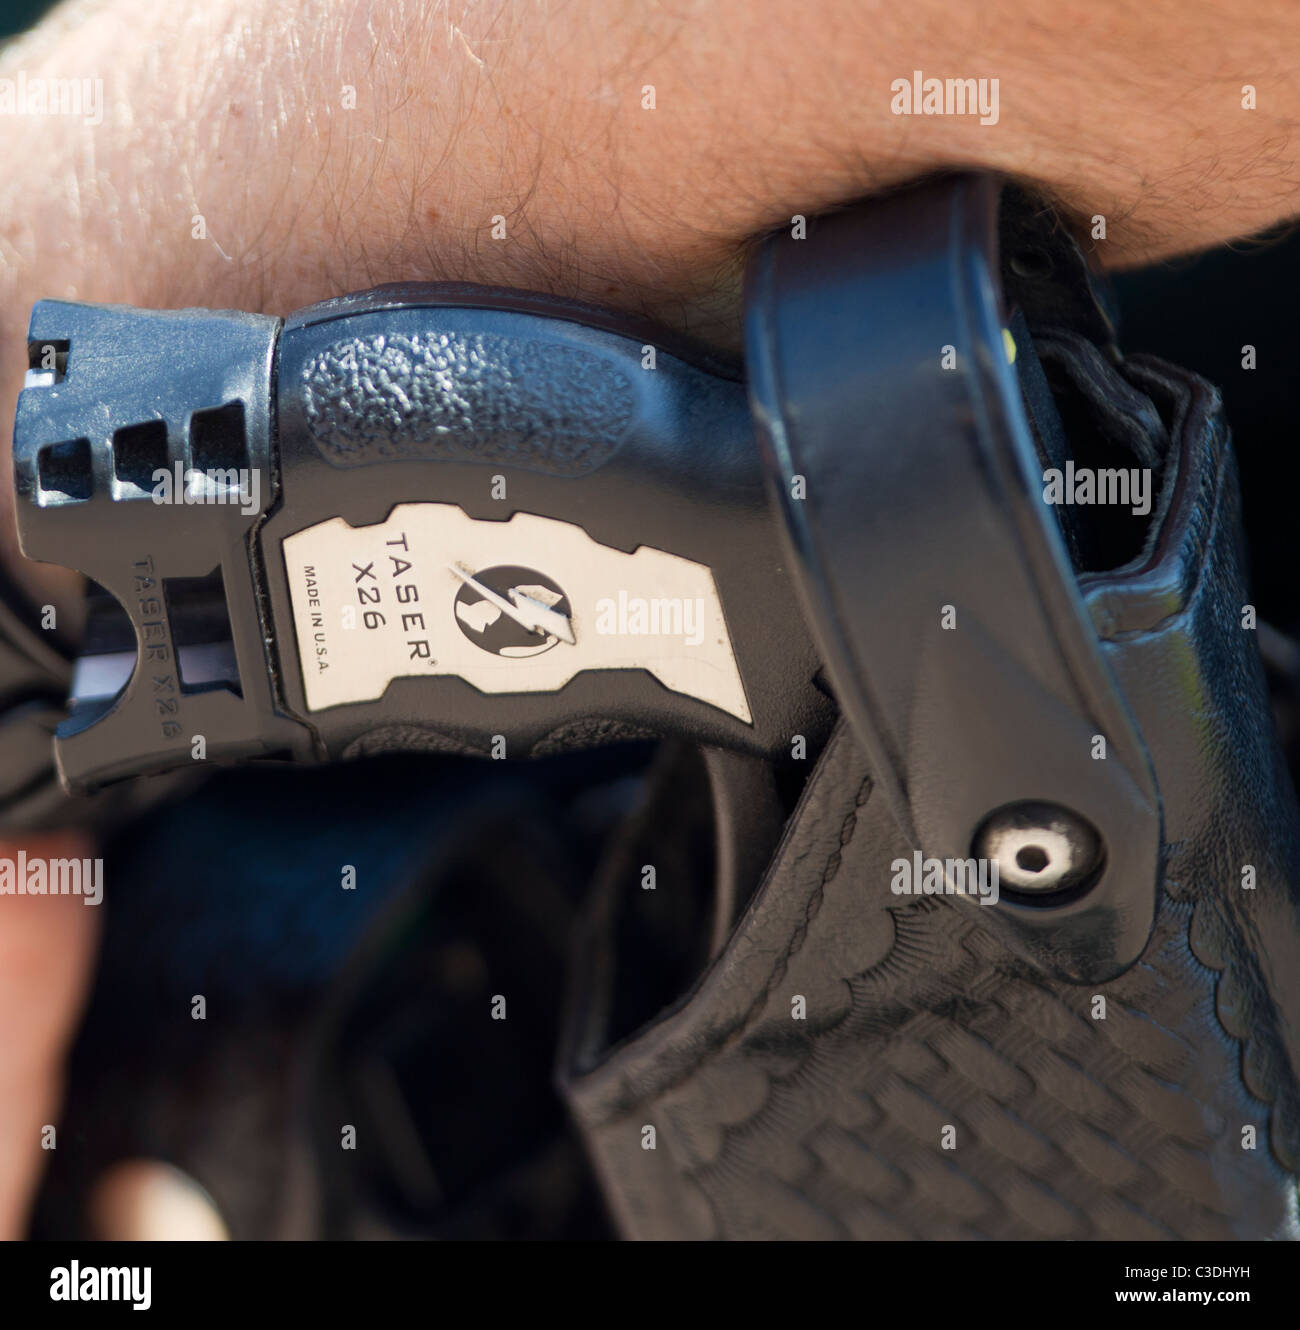 A Taser weapon in a holster Stock Photo